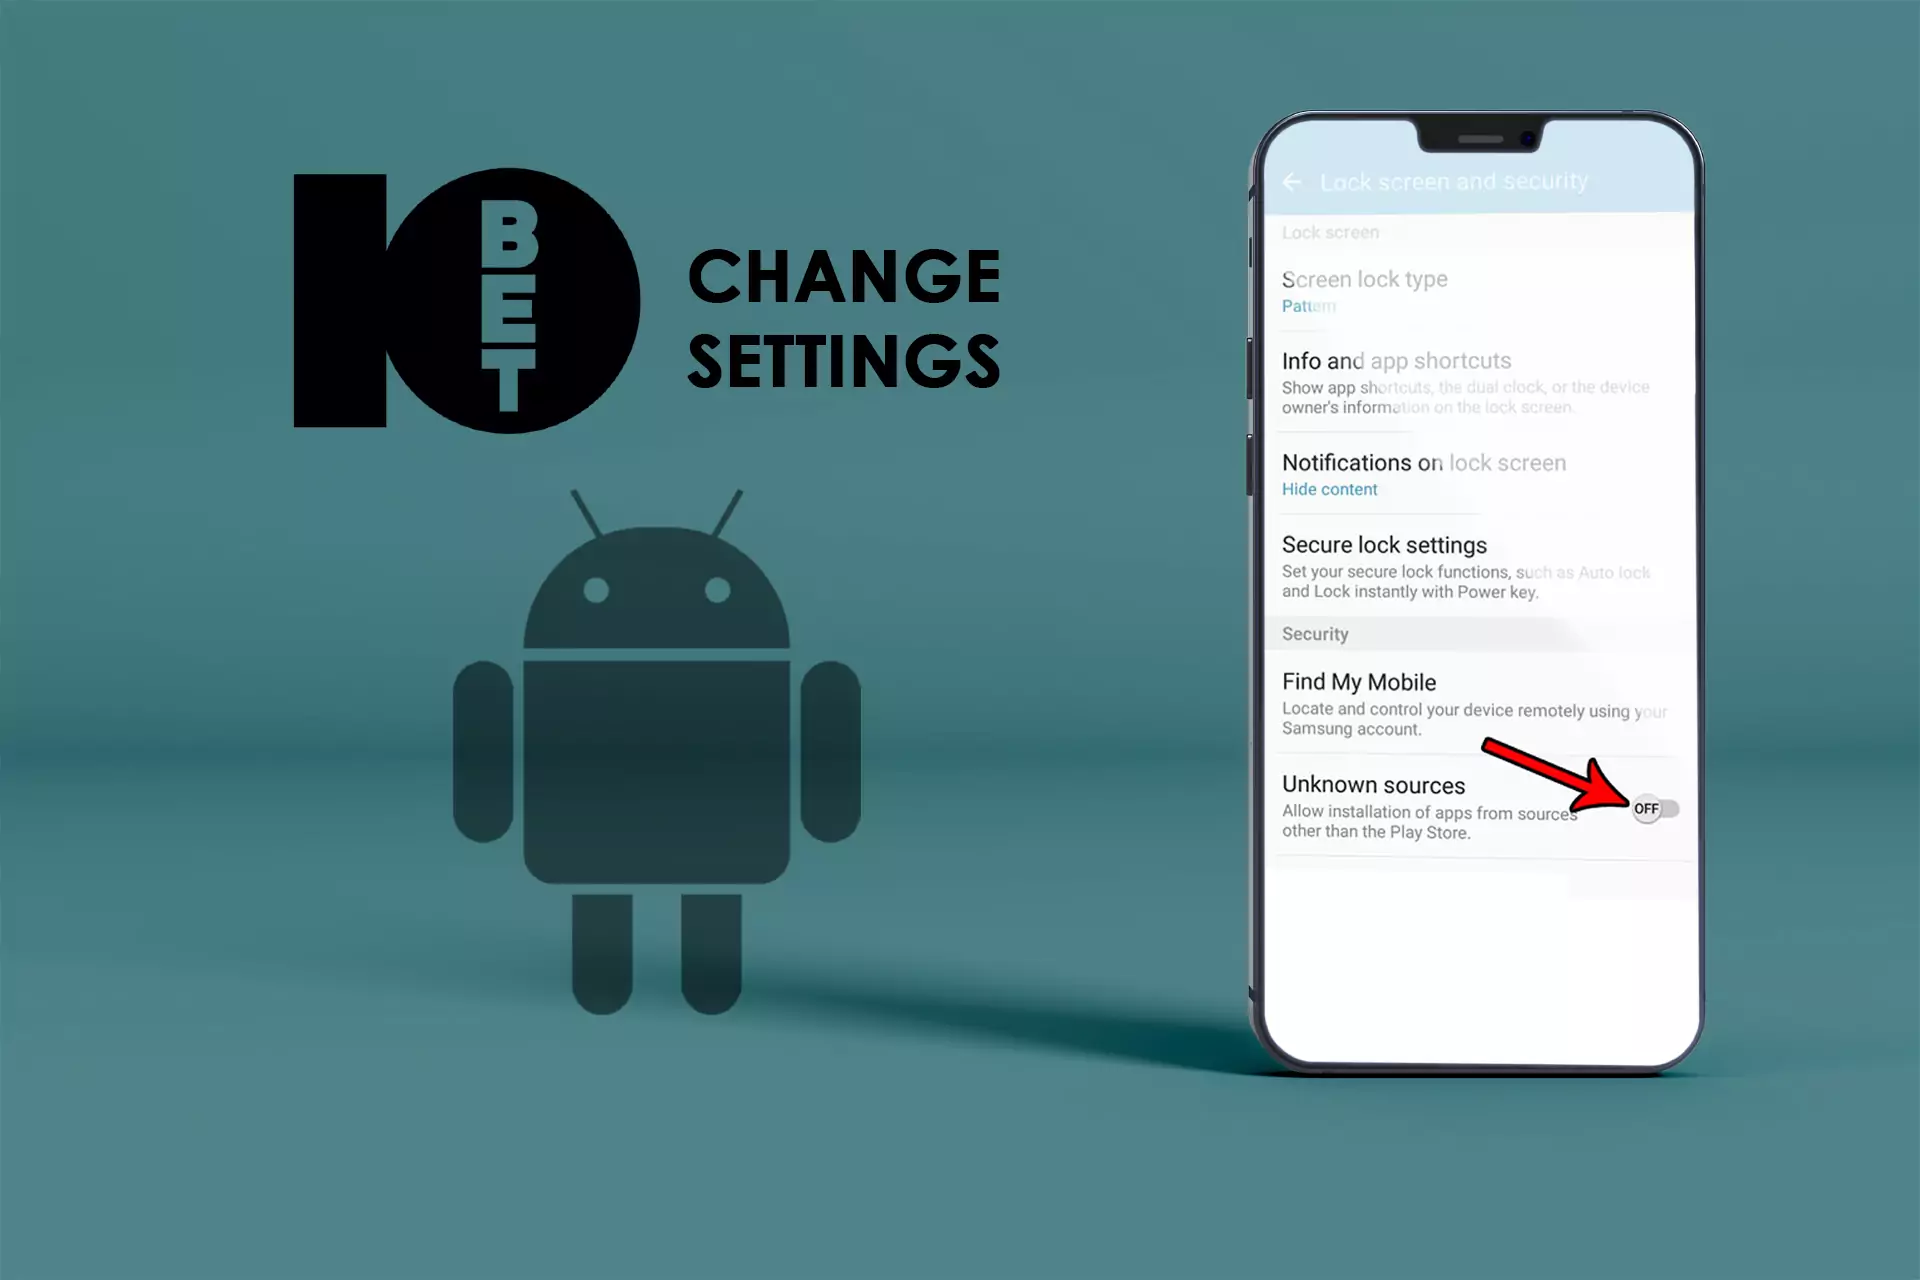 Change Security Settings and allow installation of apps.